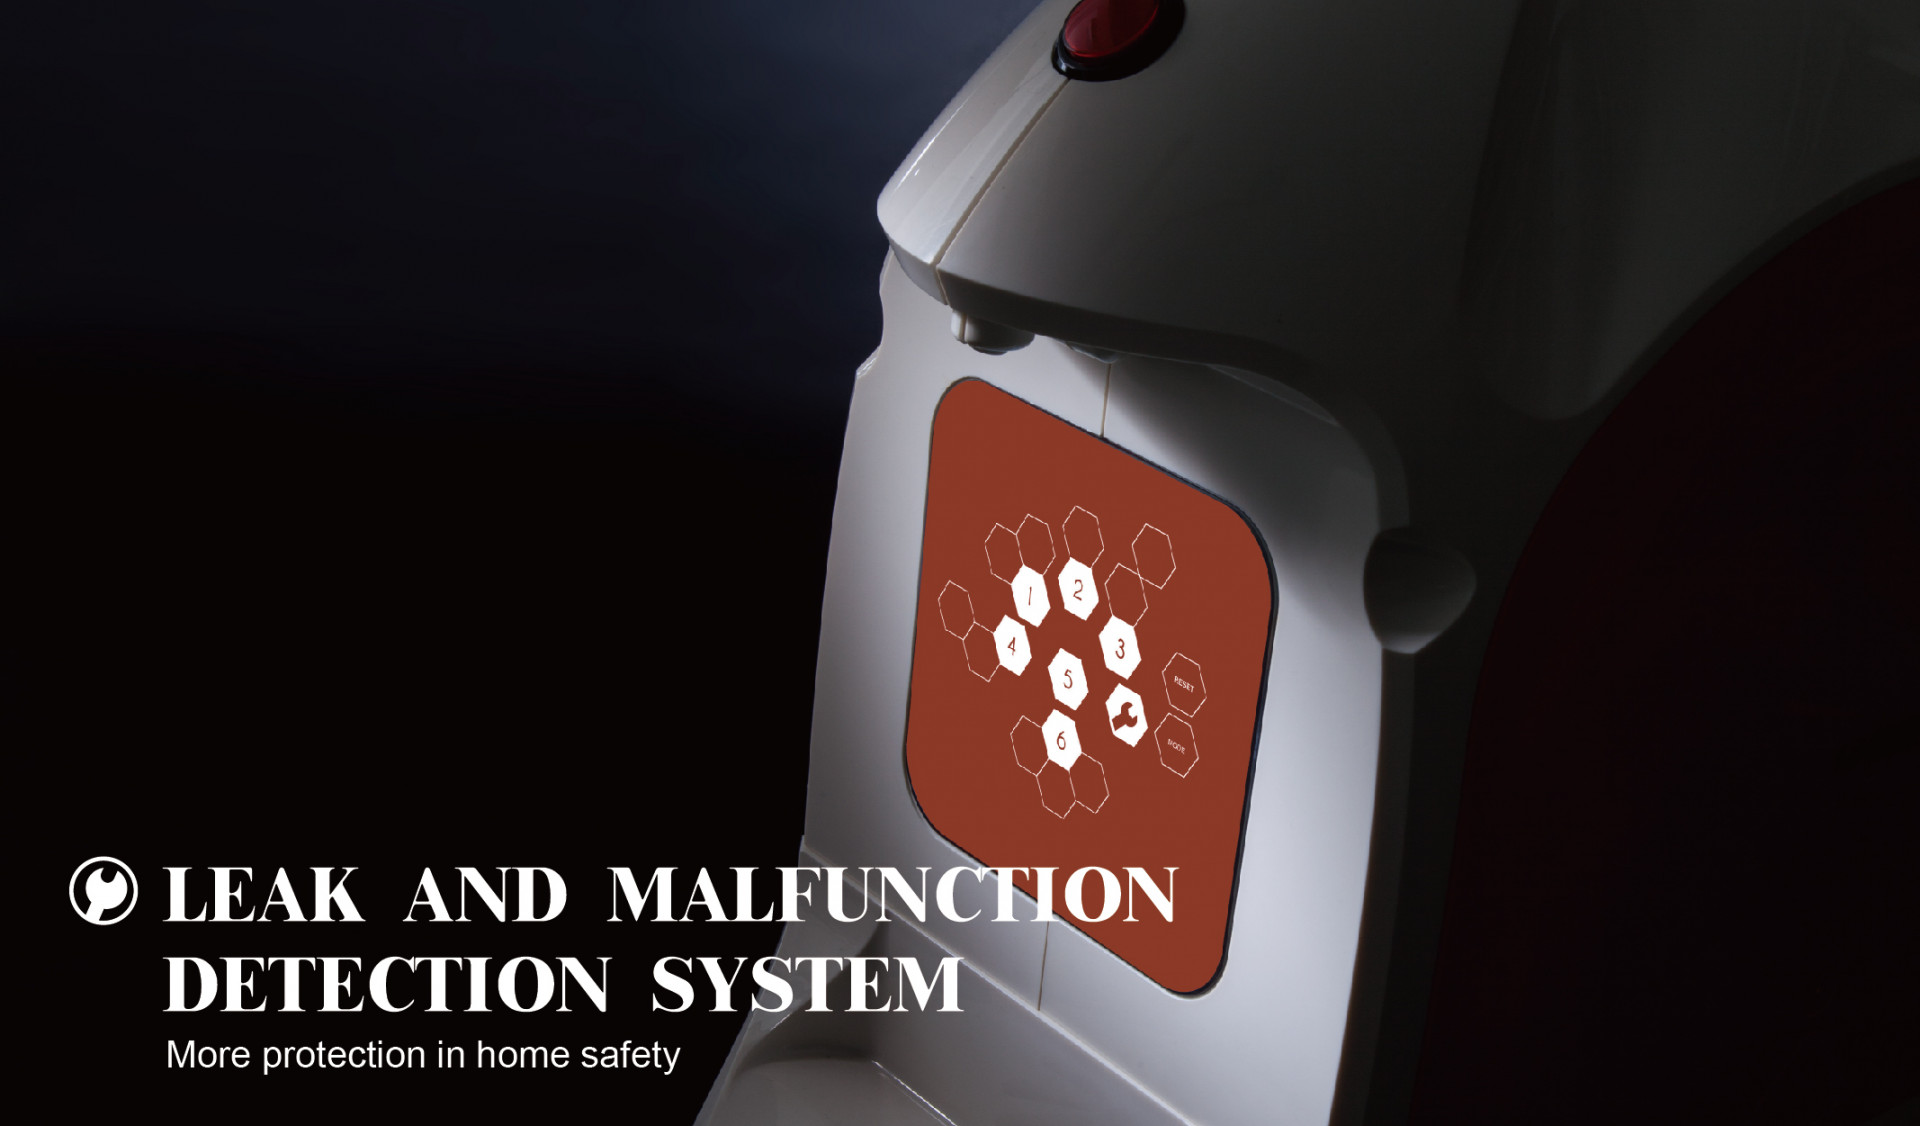 RO SYSTEM LEAK AND MALFUNCTION DETECTION SYSTEM